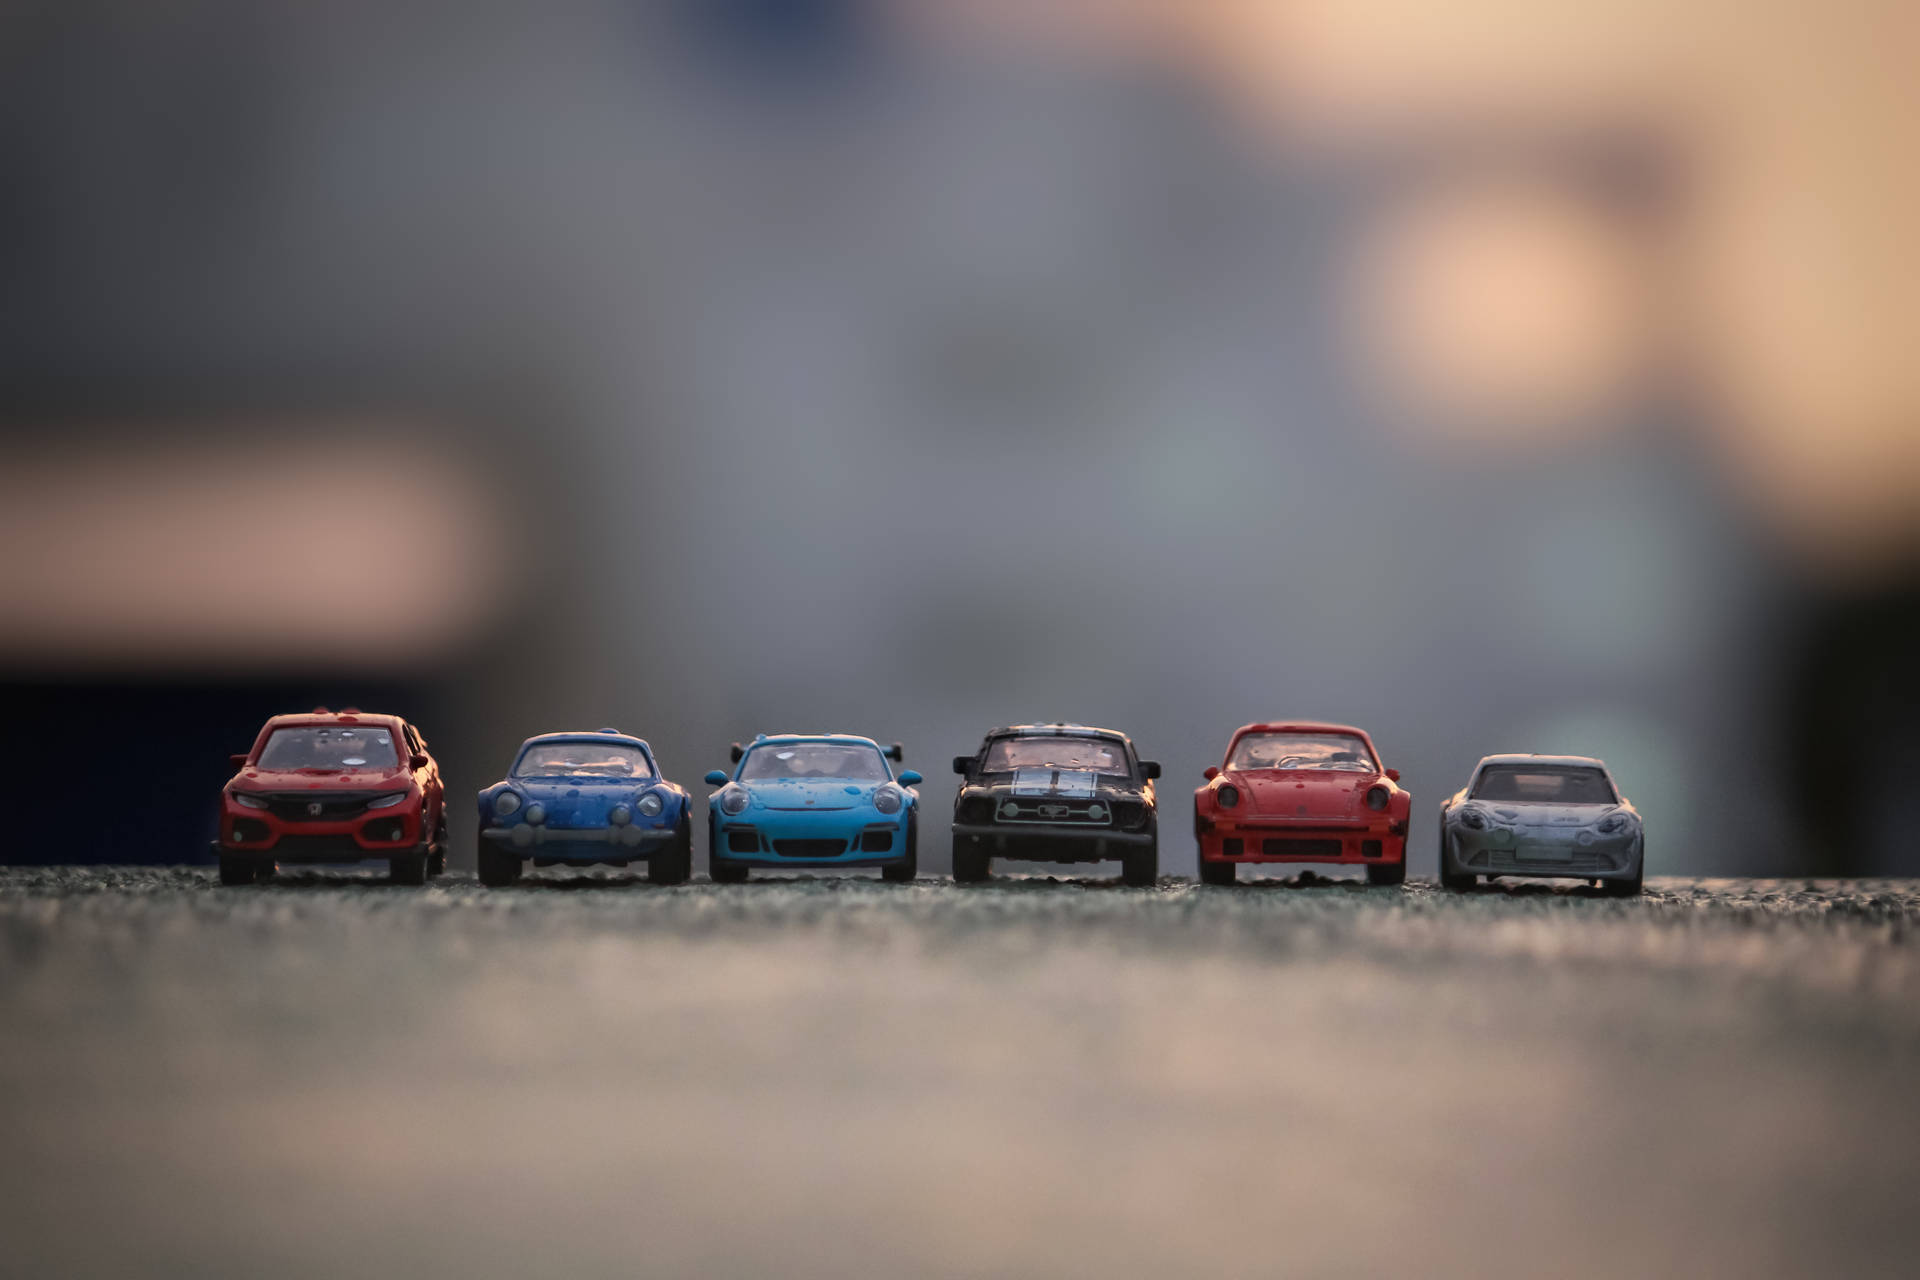 Car Toy Figurines Mustang Hd Background